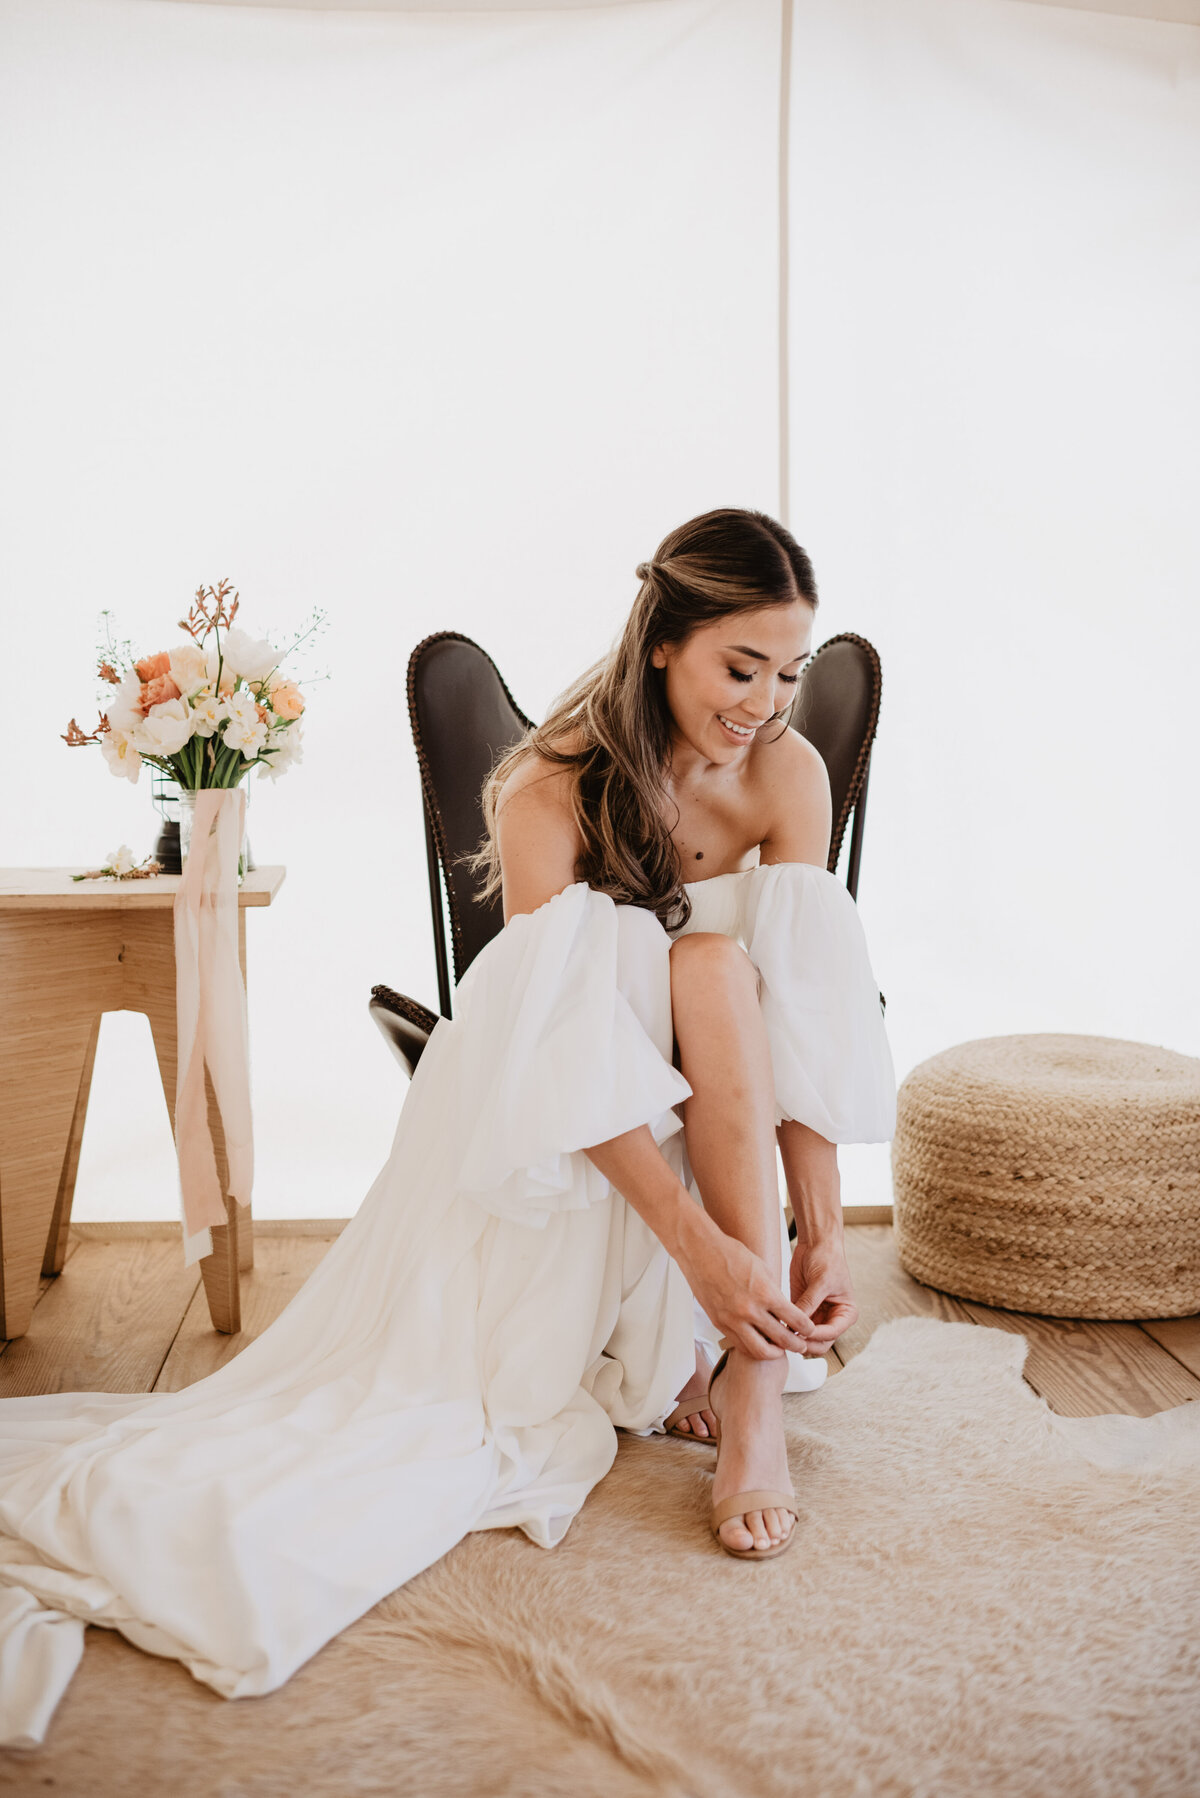 Utah Elopement Photographer captures woman putting on shoes before wedding